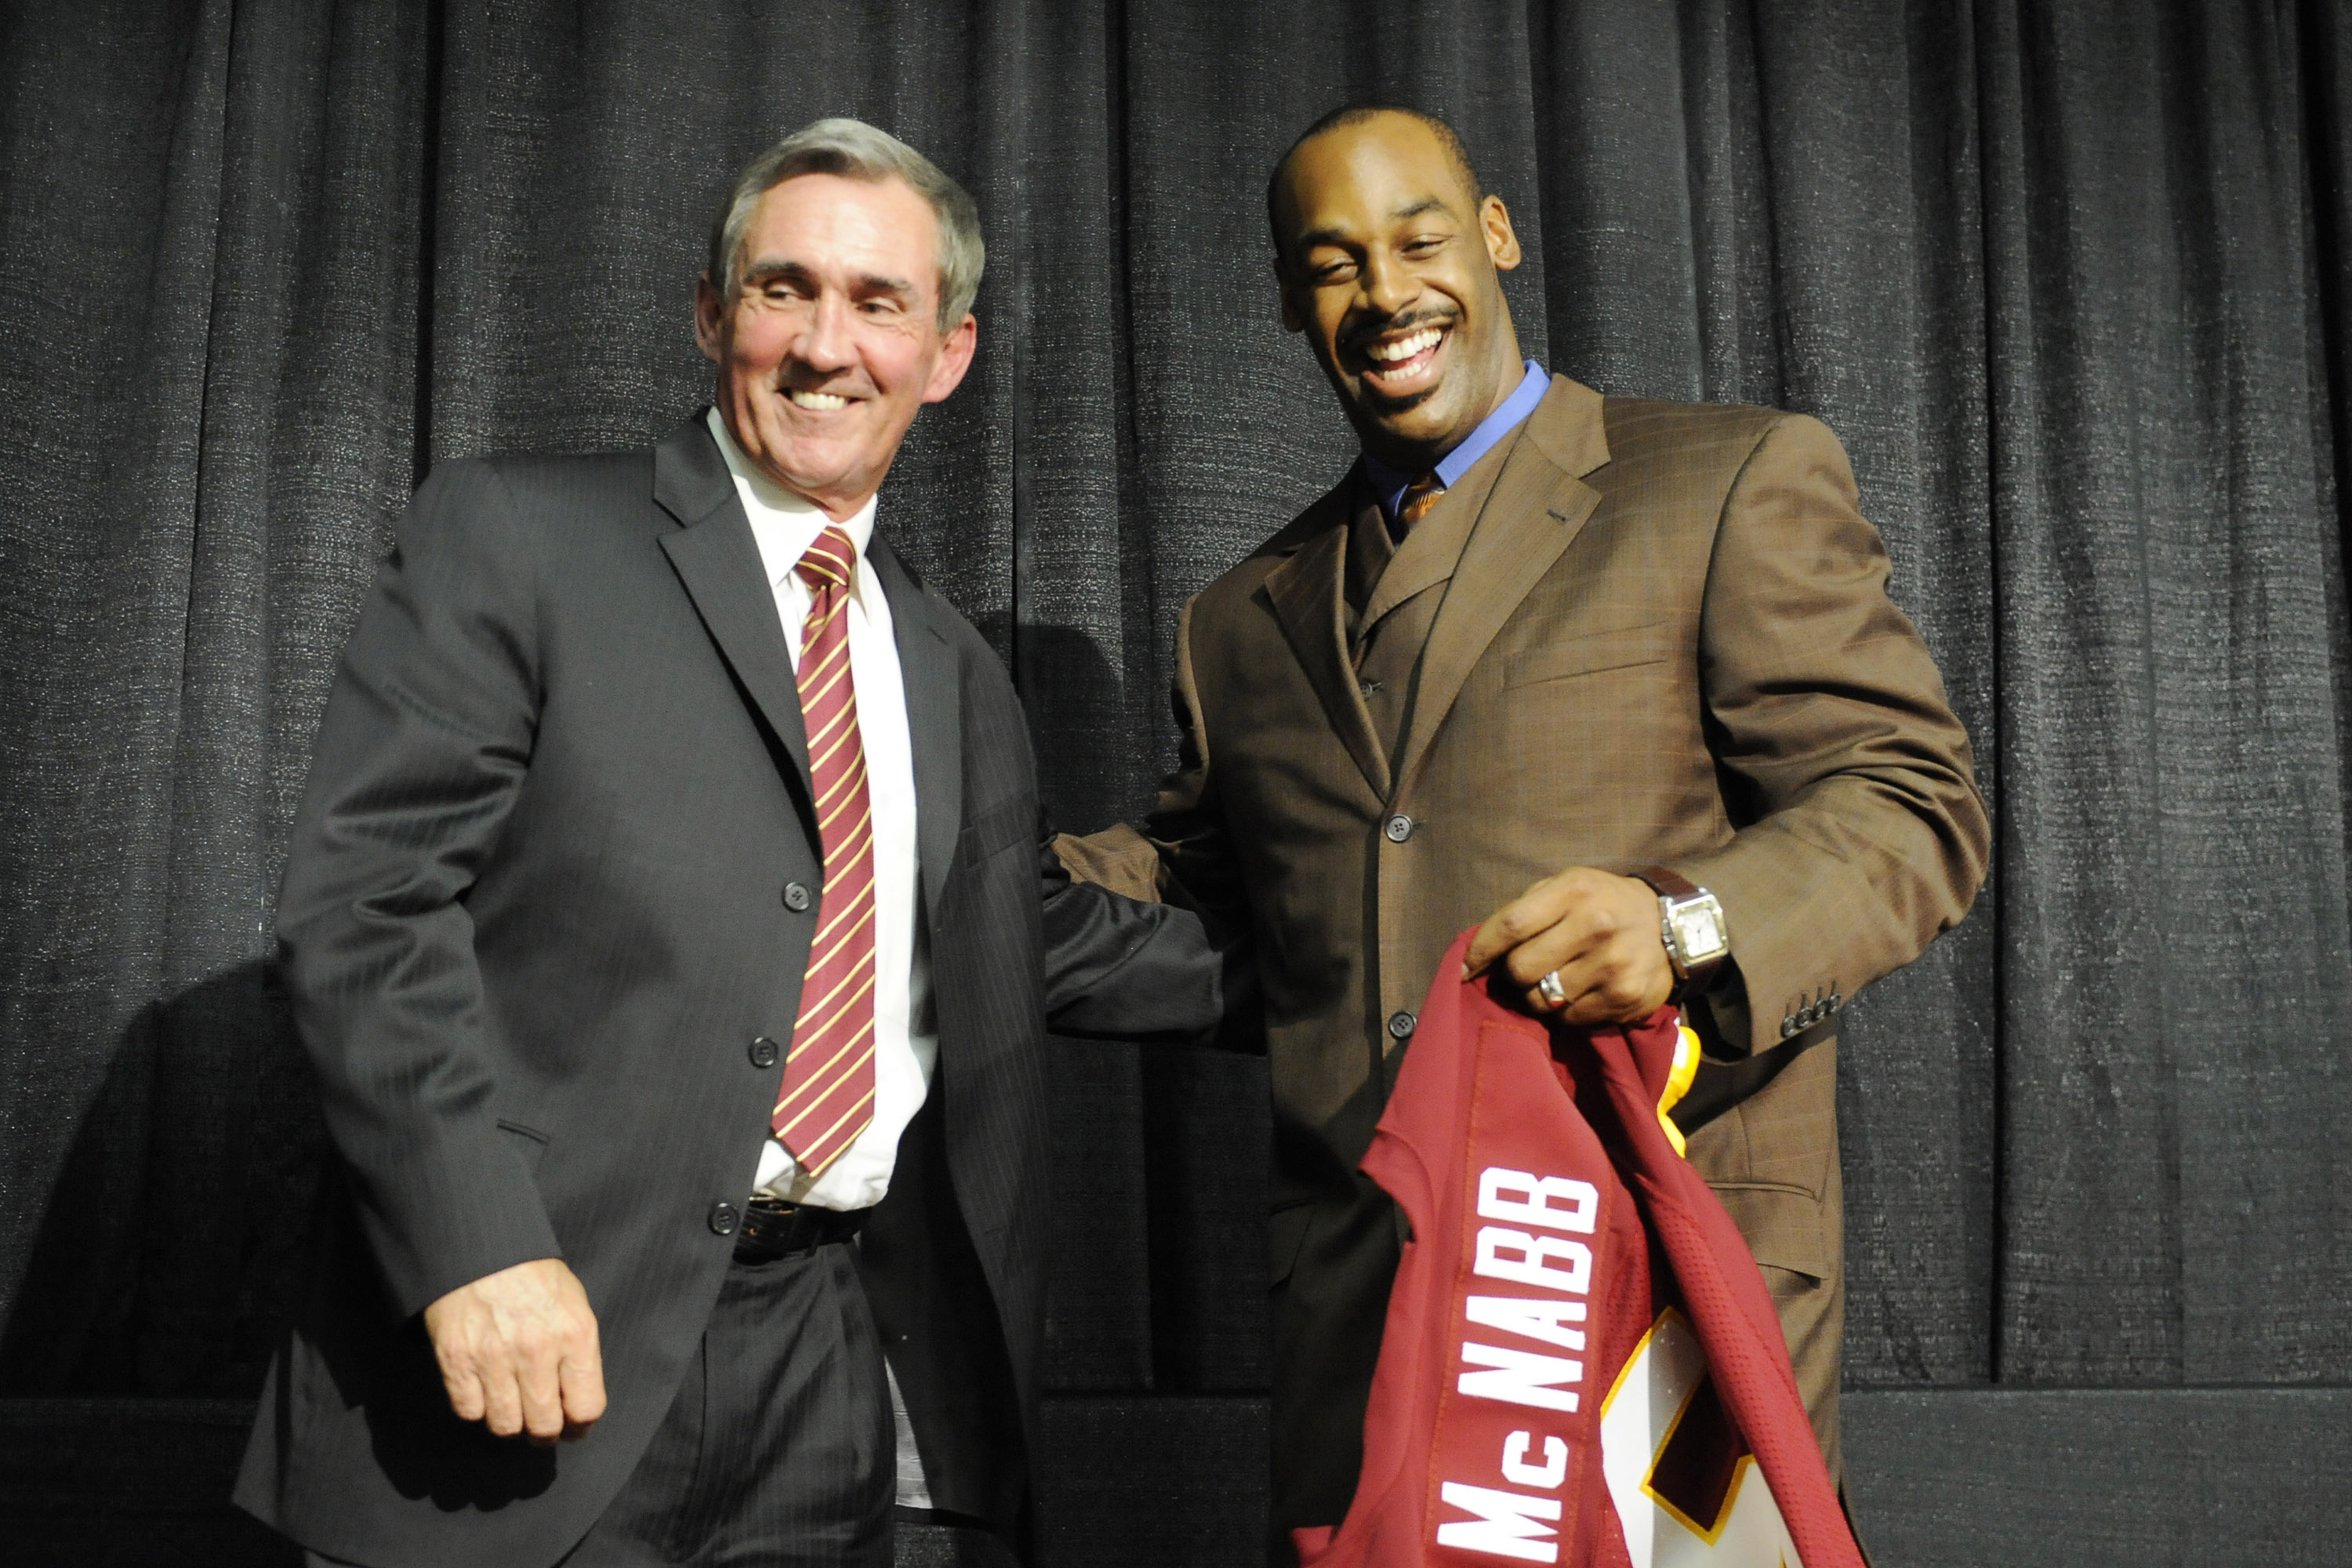 ASHURN, VA - APRIL 6:  Mike Shanahan, head coach of the Washington Redskins presents Donovan McNabb with his new jersey during a press conference on April 6, 2010 at Redskin Park in Ashburn, Virginia.  (Photo by Mitchell Layton/Getty Images)